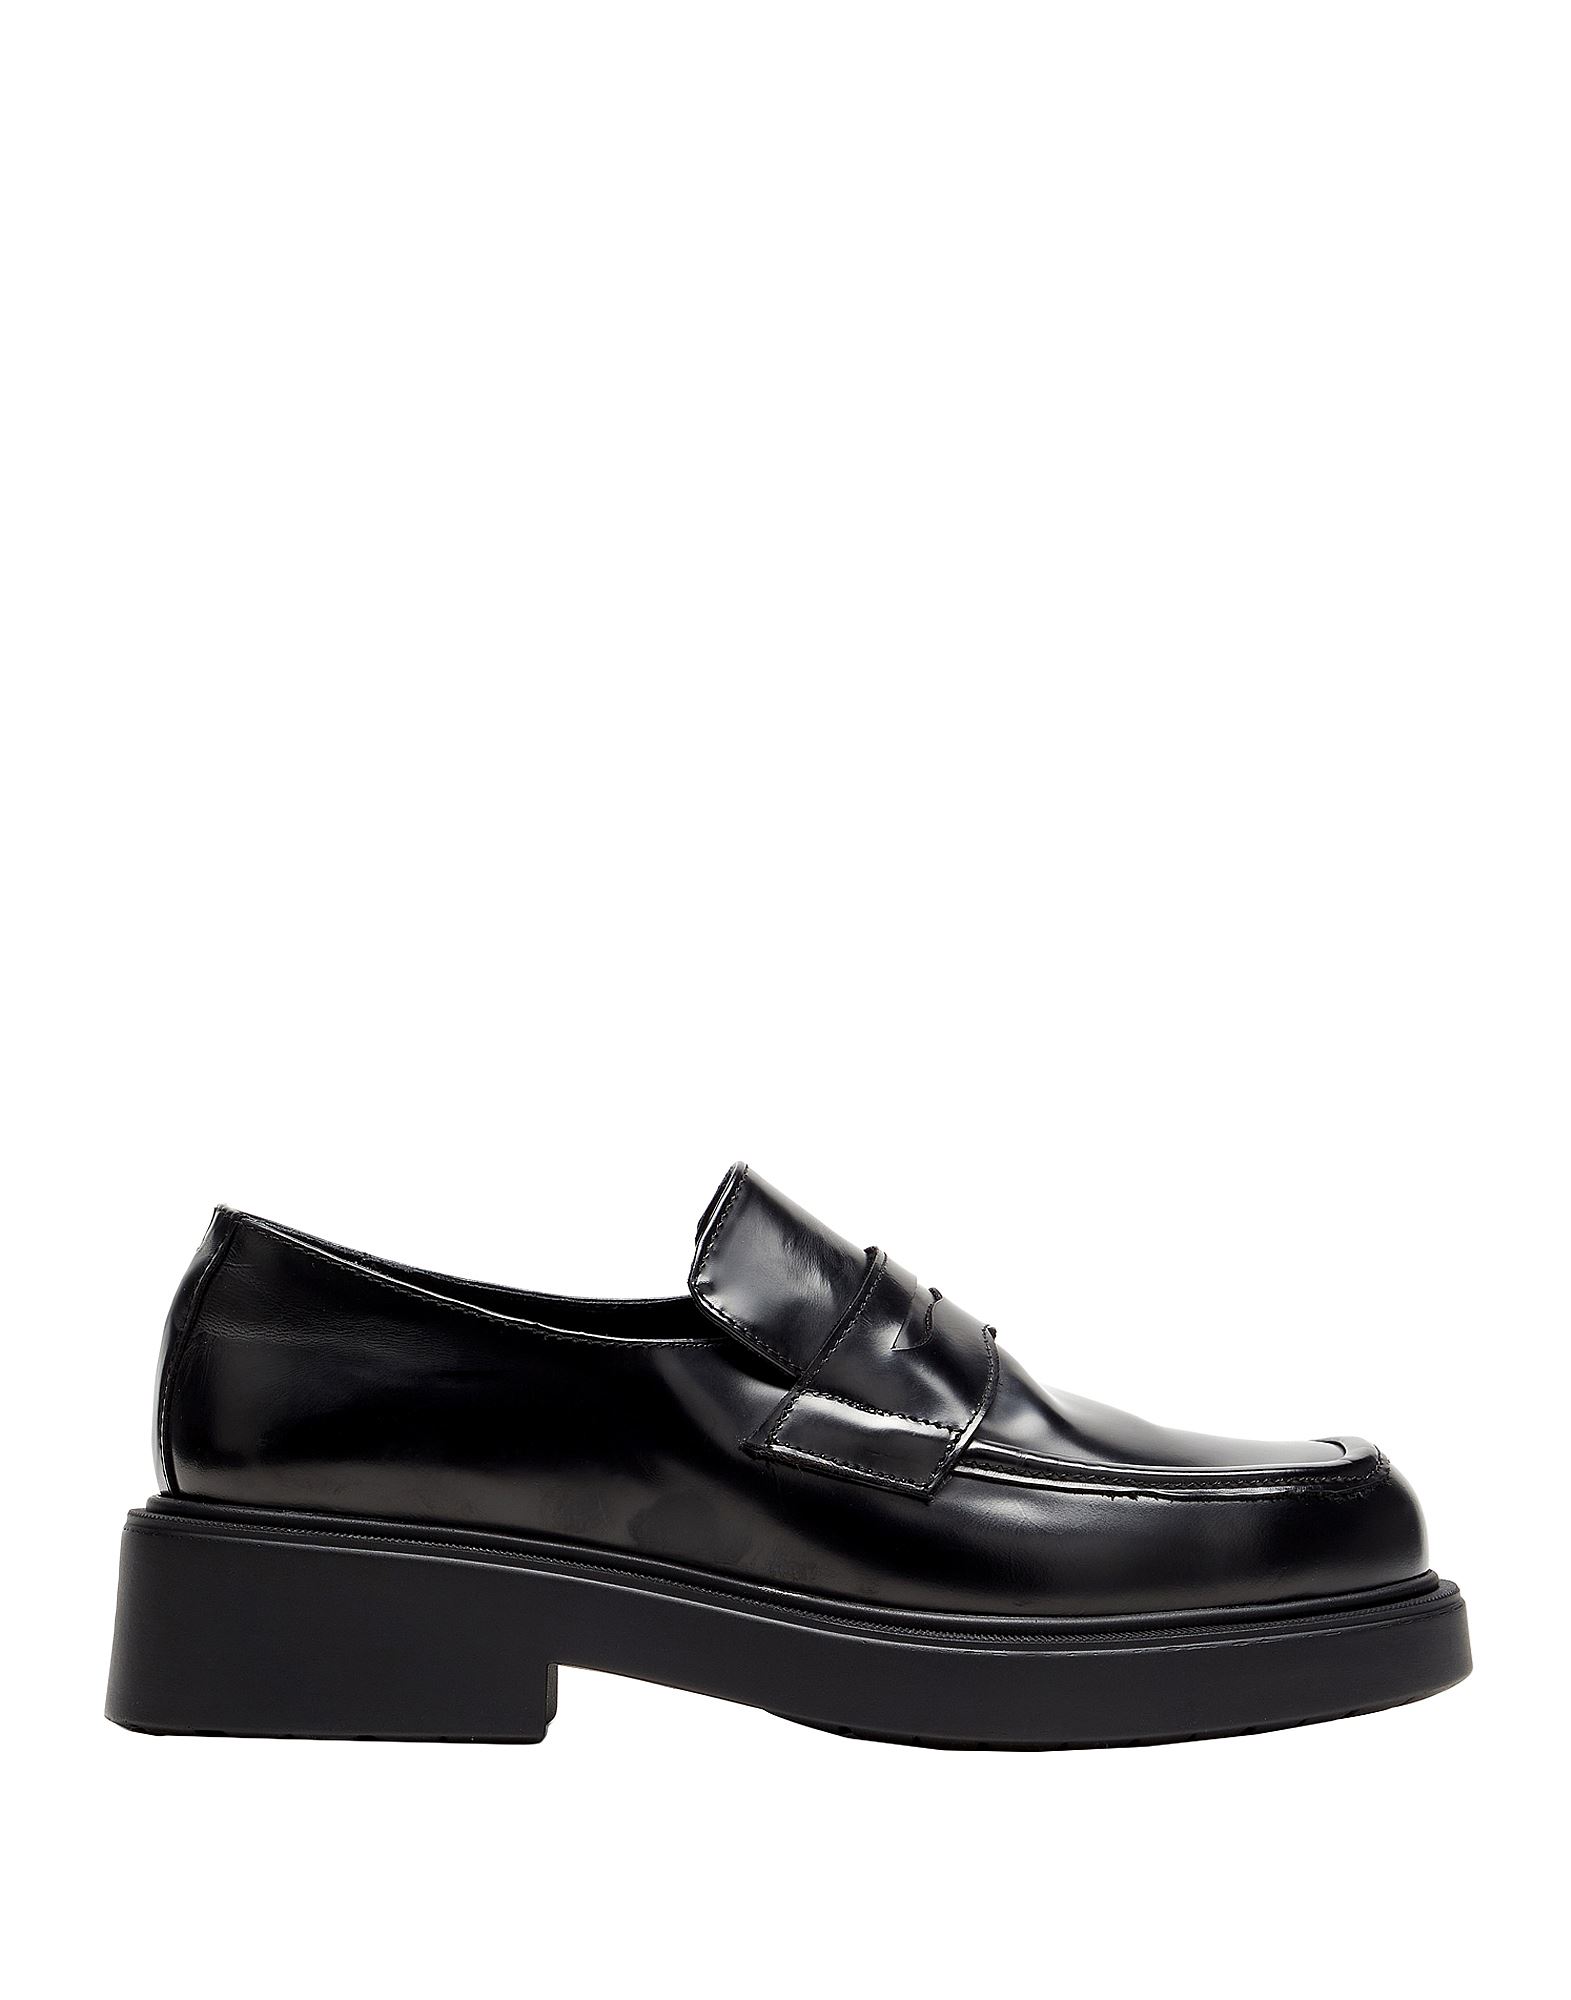 8 BY YOOX 8 BY YOOX POLISHED LEATHER PENNY LOAFER MAN LOAFERS BLACK SIZE 9 CALFSKIN